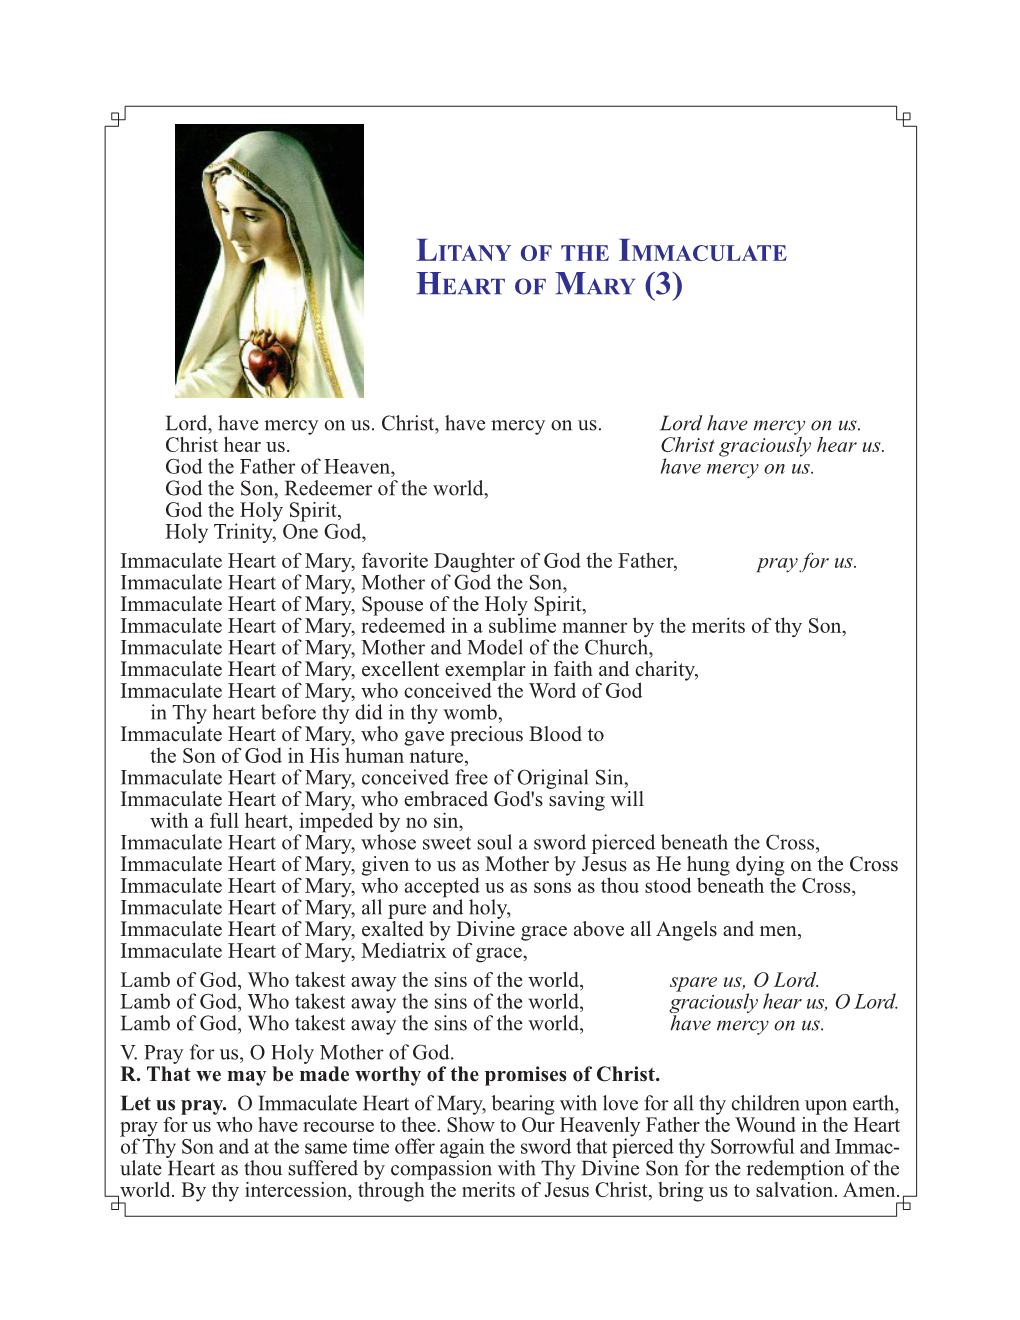 Litany of the Immaculate Heart of Mary (3)